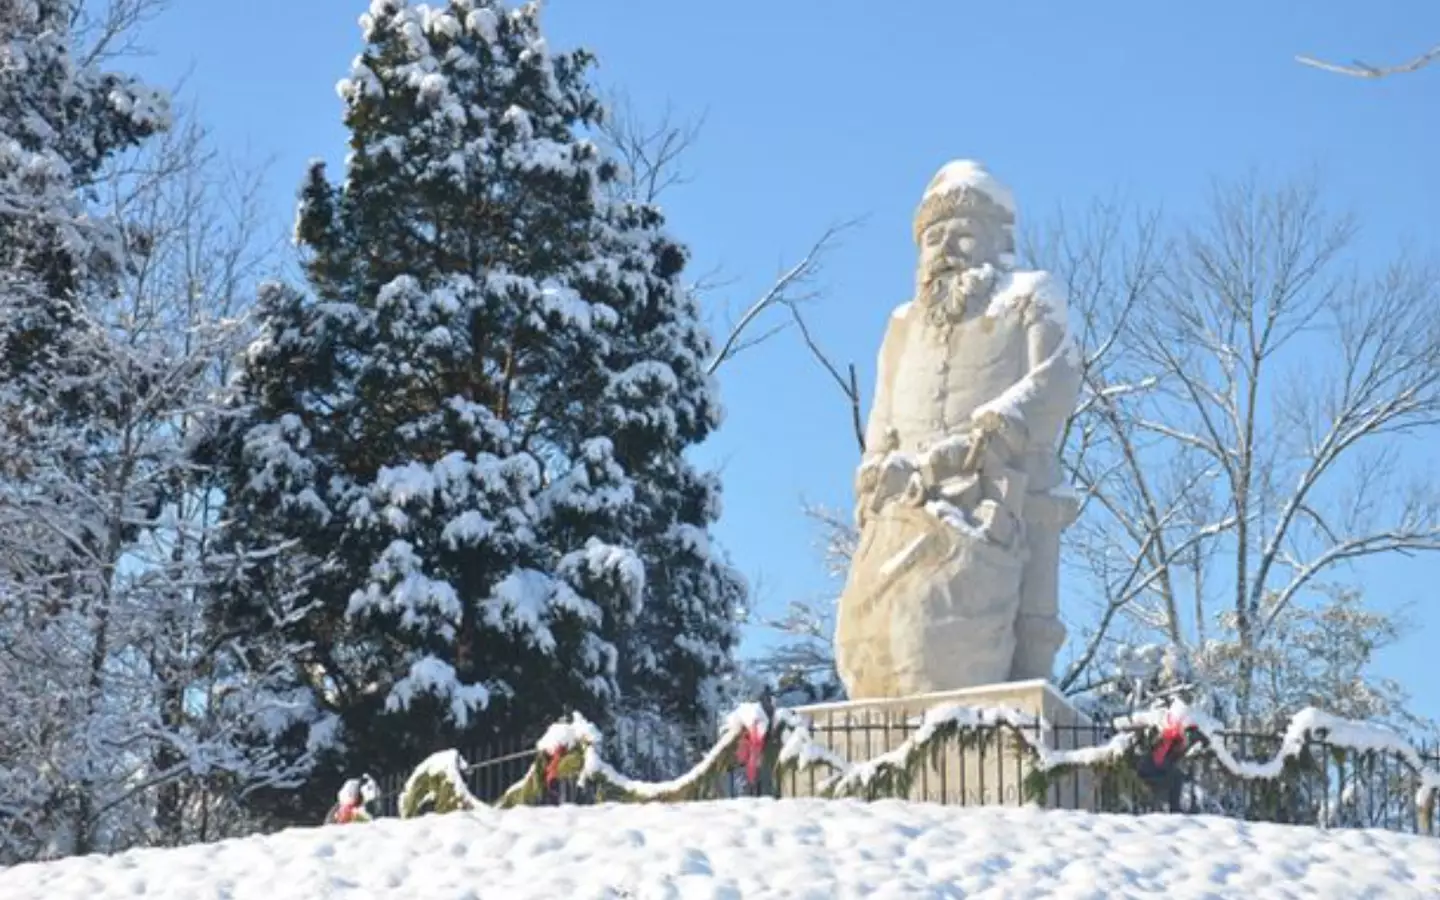 The town boasts its own Santa statue (